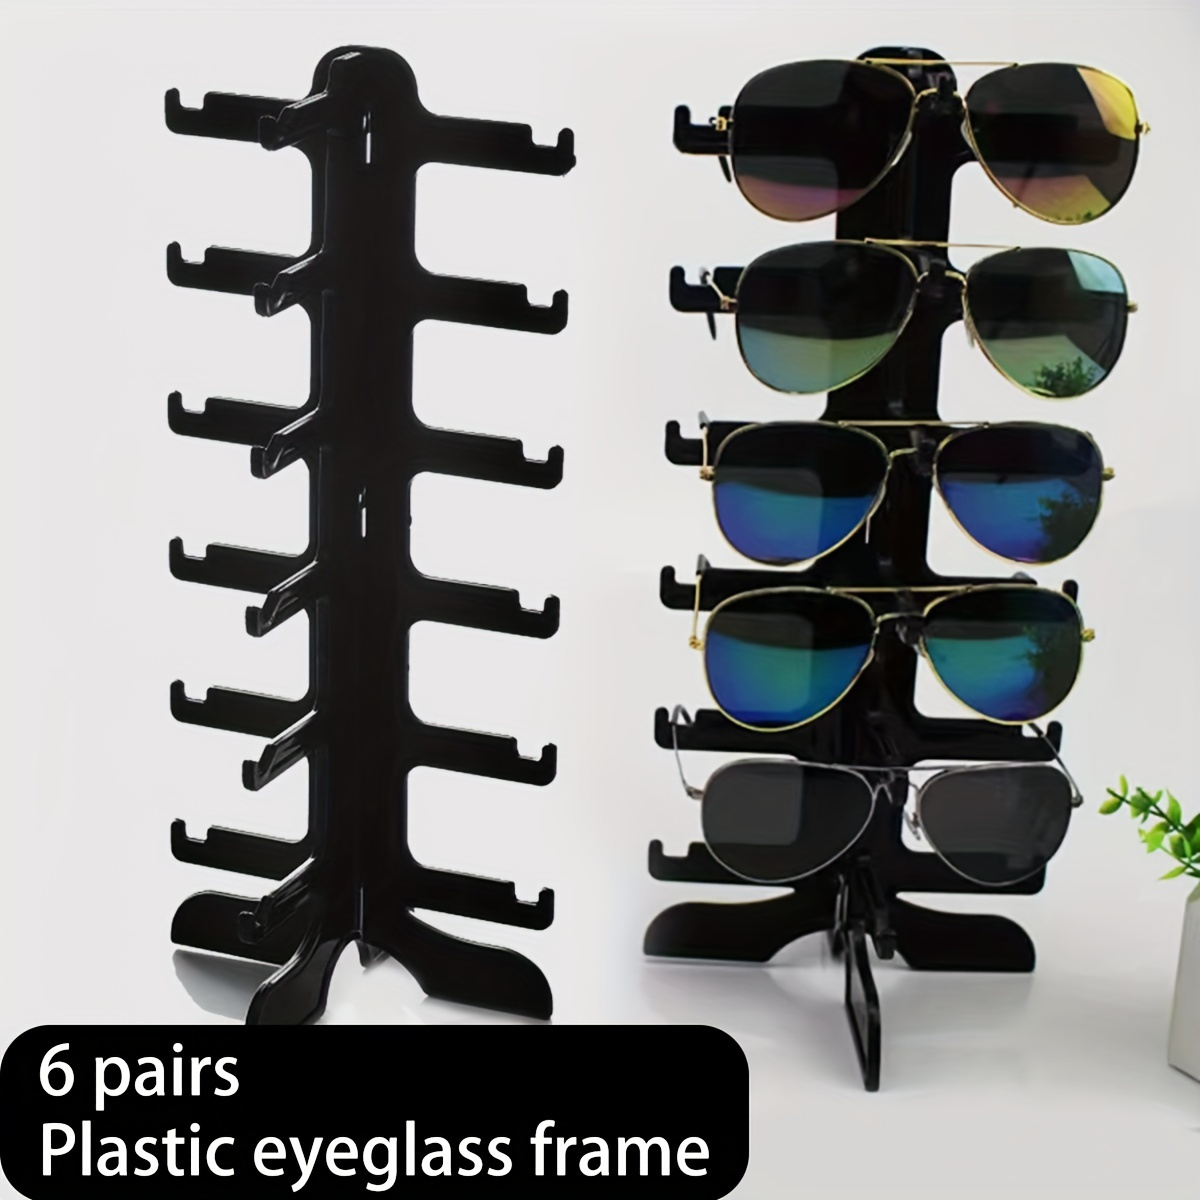 

6 Pairs Sunglasses Display Stand, Plastic Eyeglass Frame Holder, Rectangle Tabletop Rack For Multipurpose Use, Black Jewelry Tower Organizer With Other Closure Types For Shops